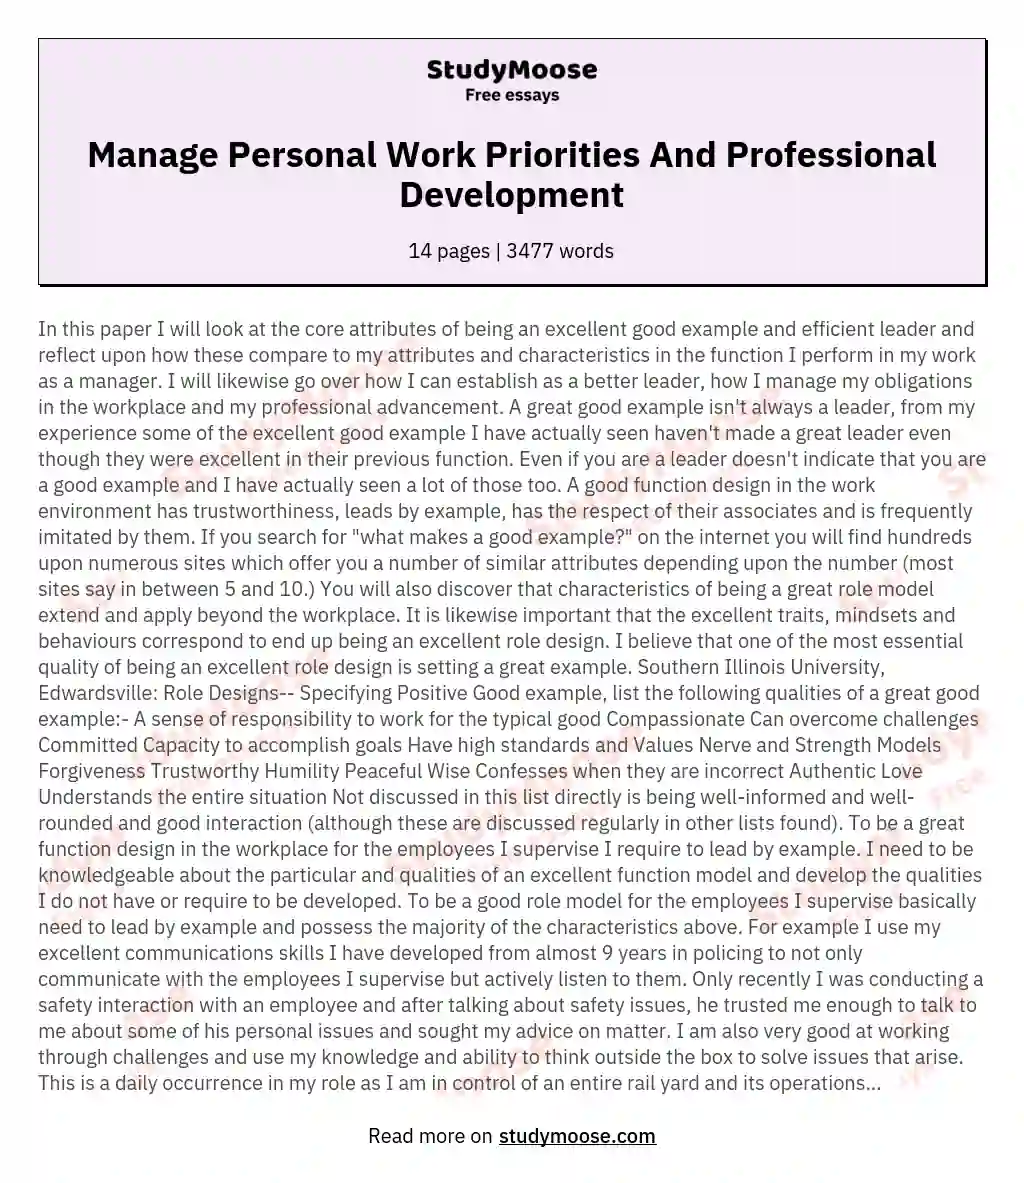 Manage Personal Work Priorities And Professional Development essay